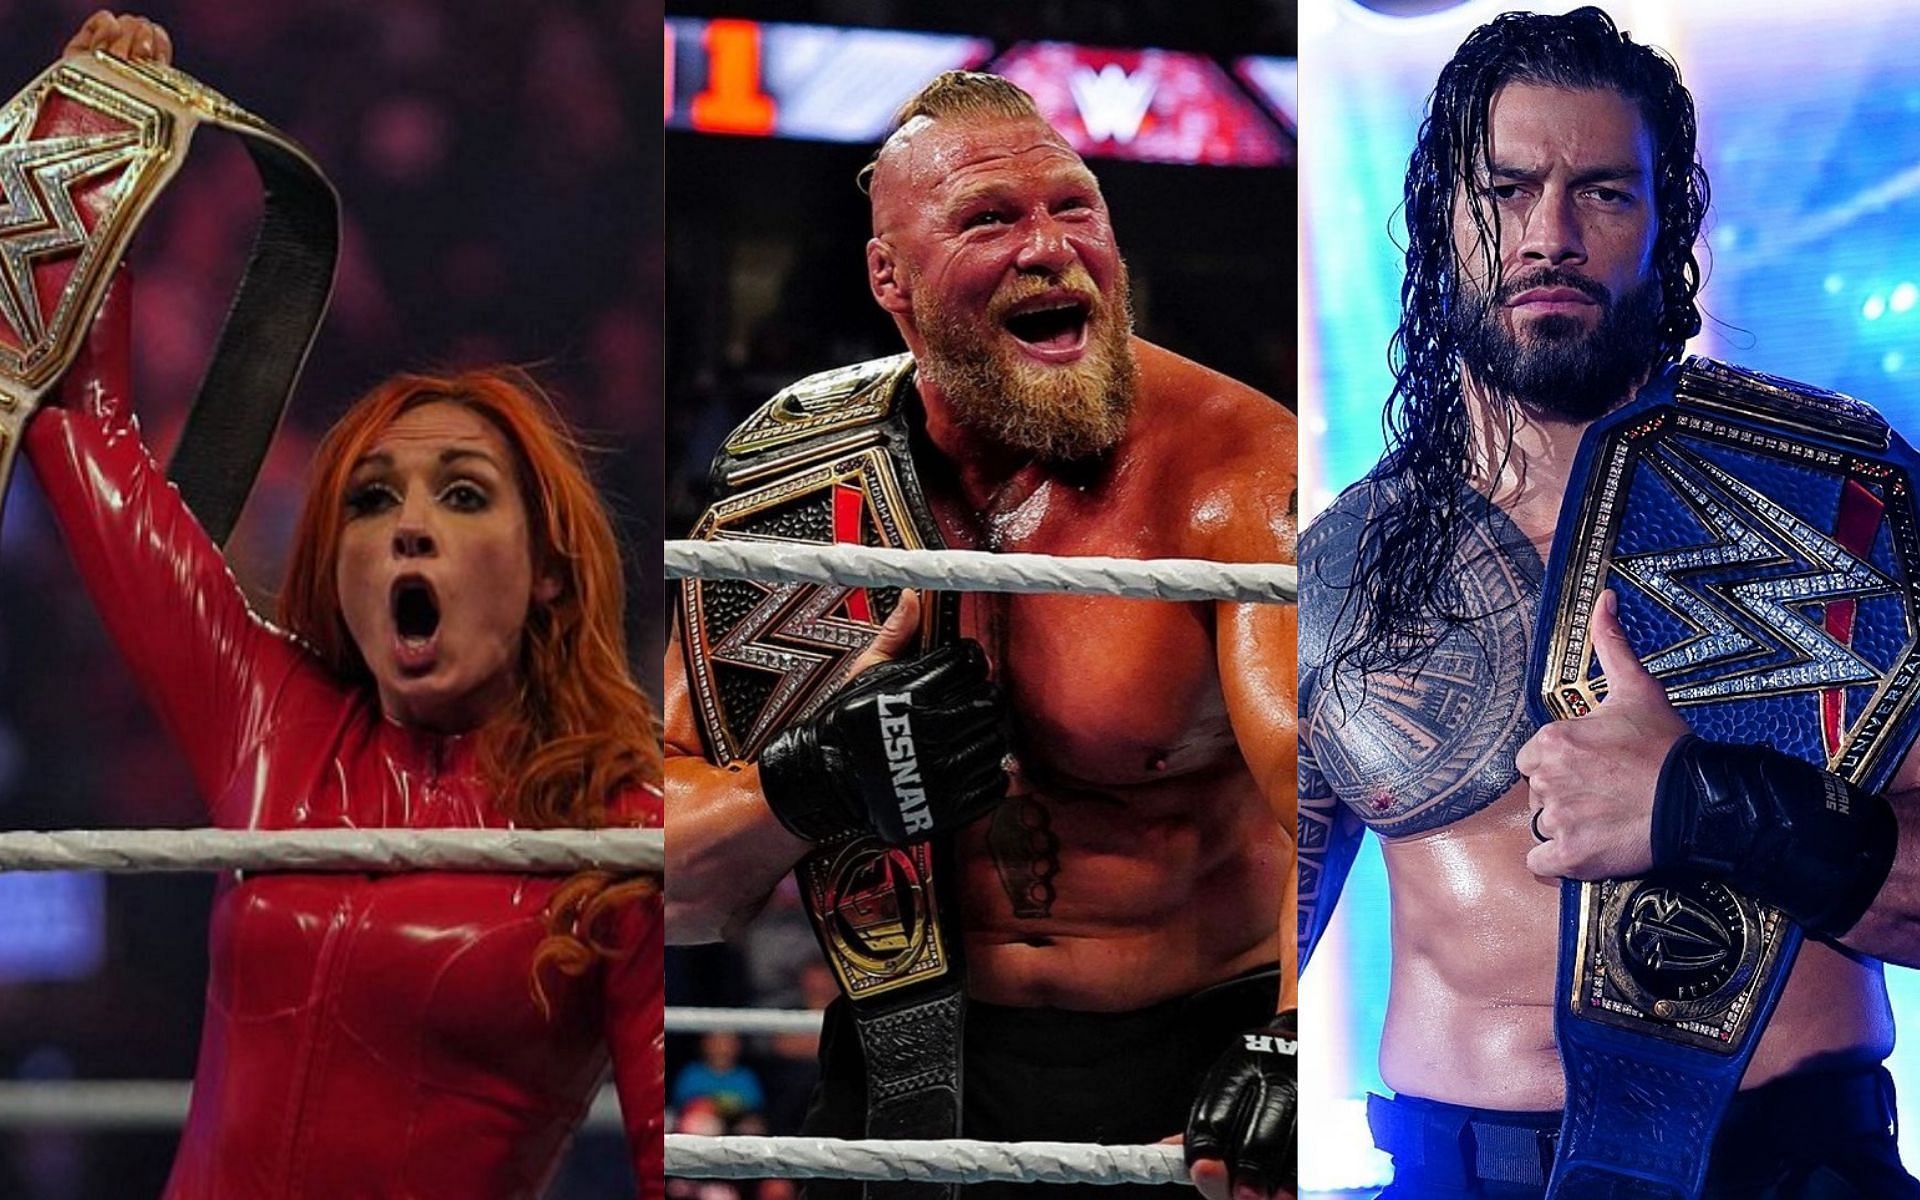 WWE Royal Rumble 2022 Matches, Card, Predictions, Date, Start Time